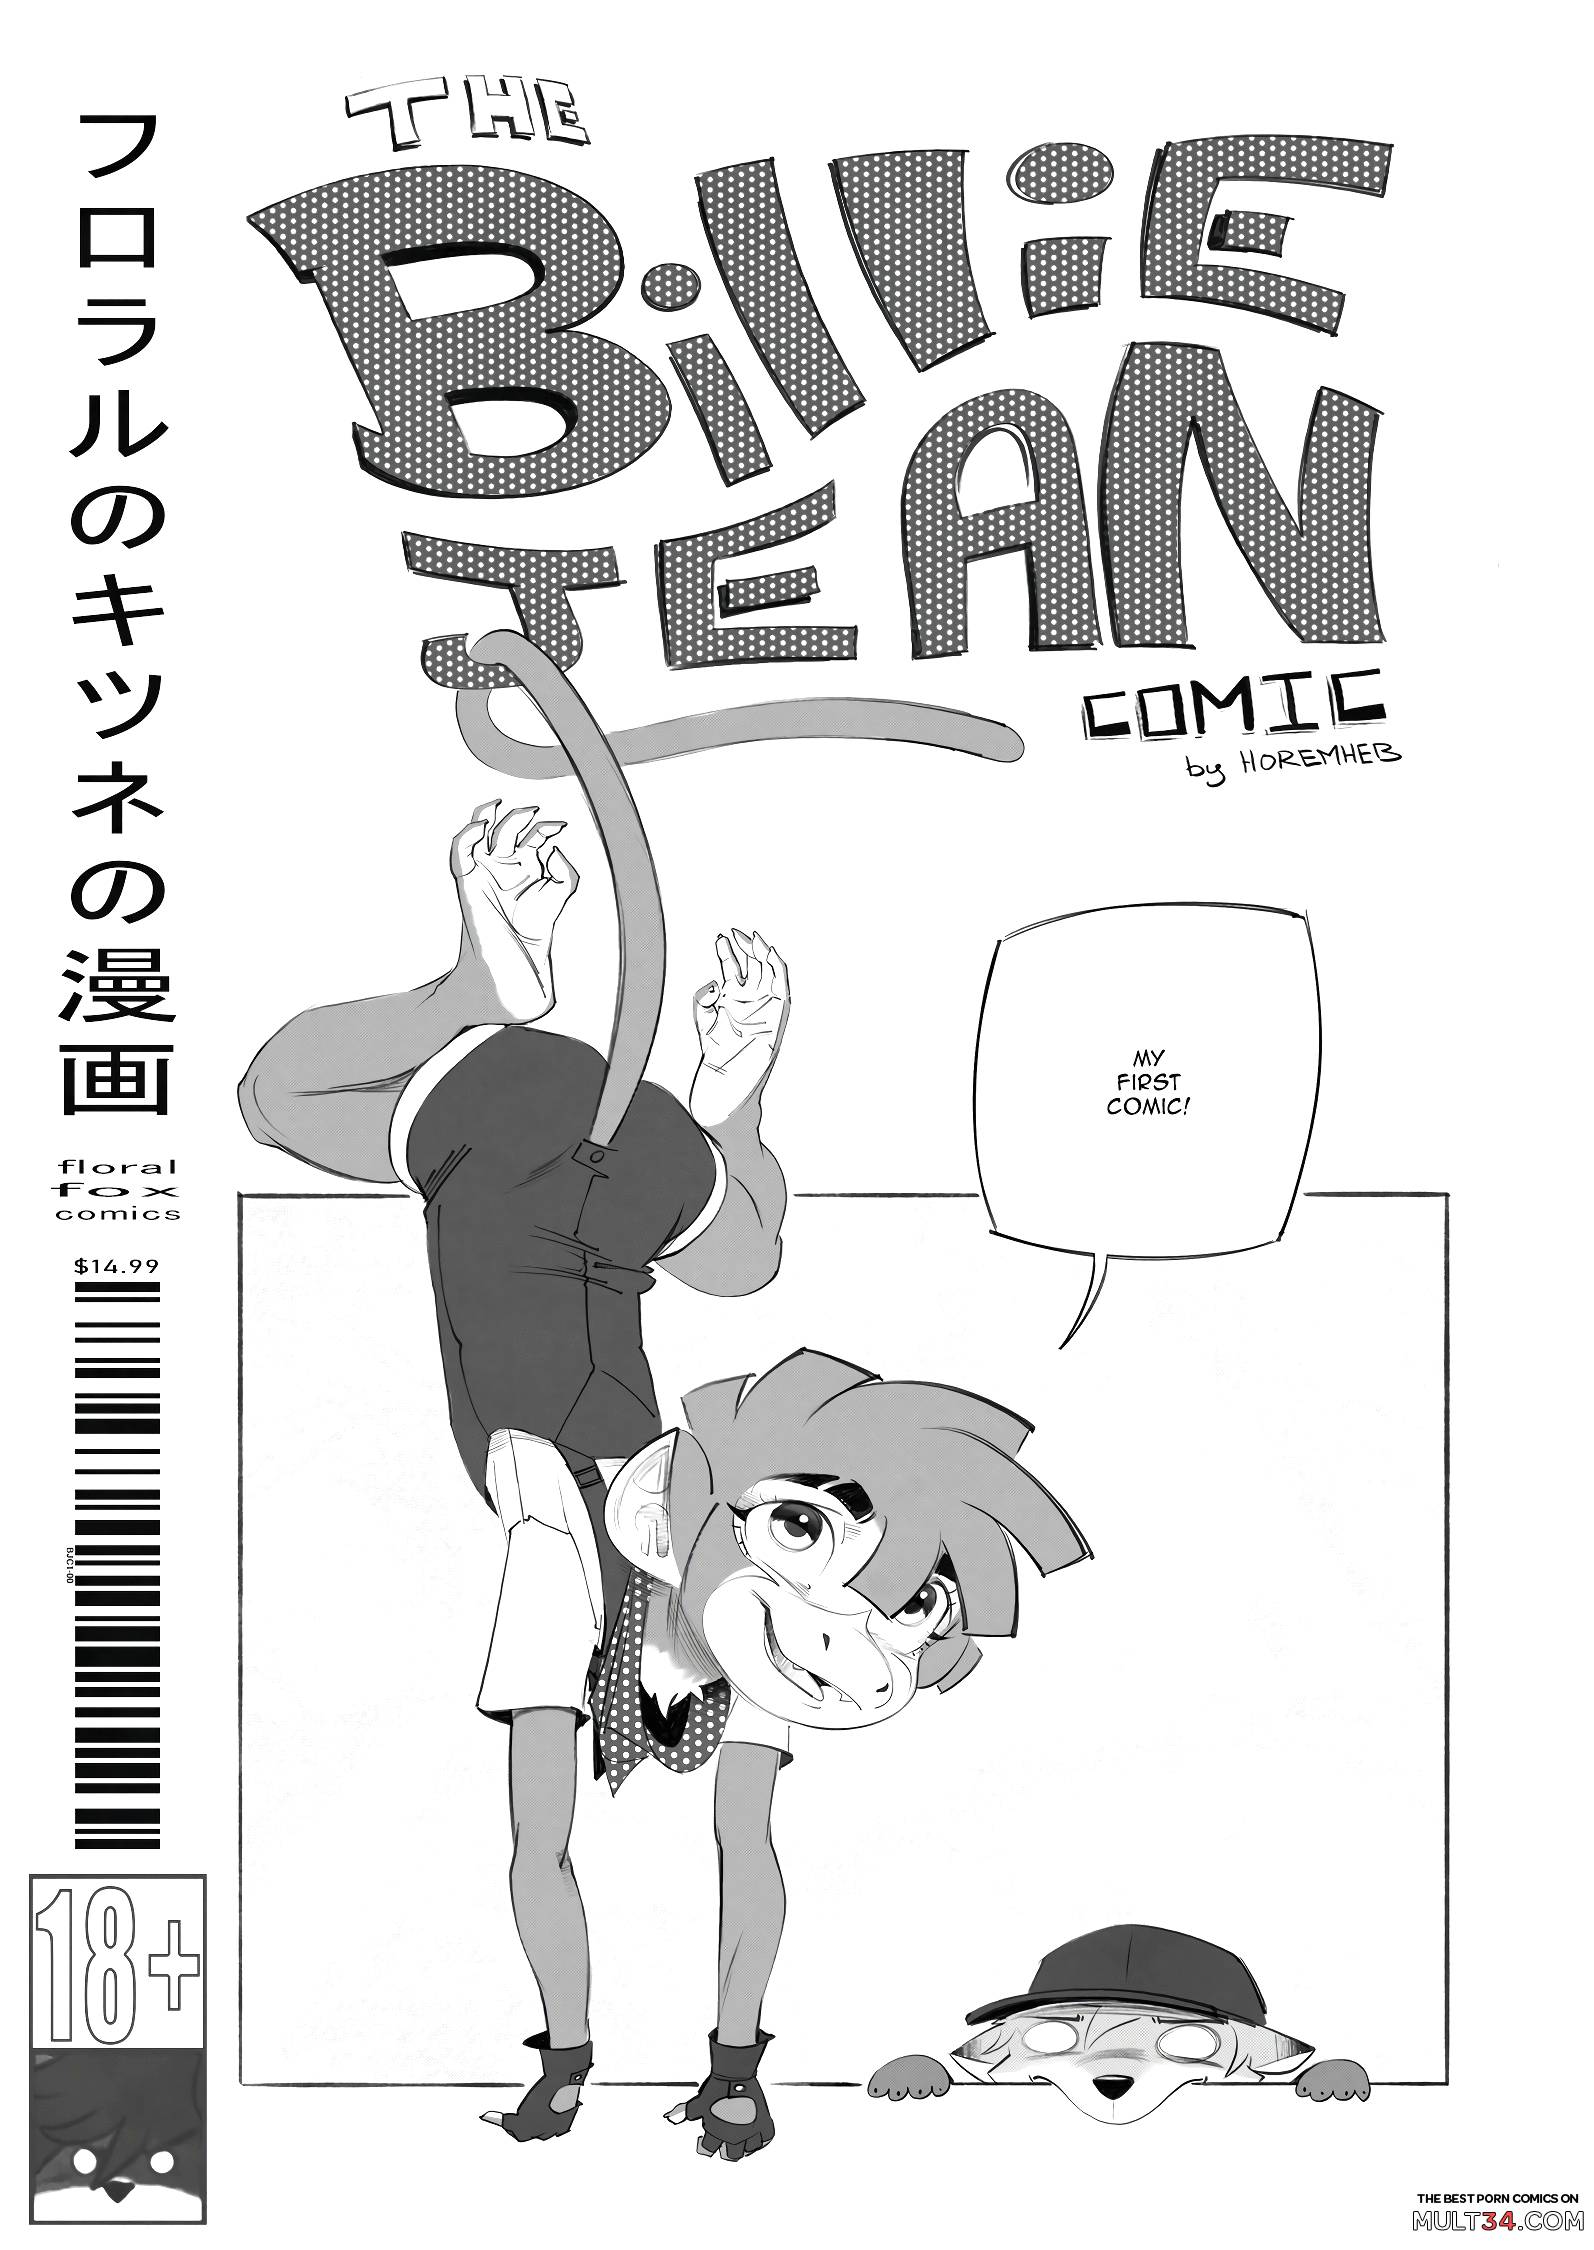 The Billie Jean Comic page 1